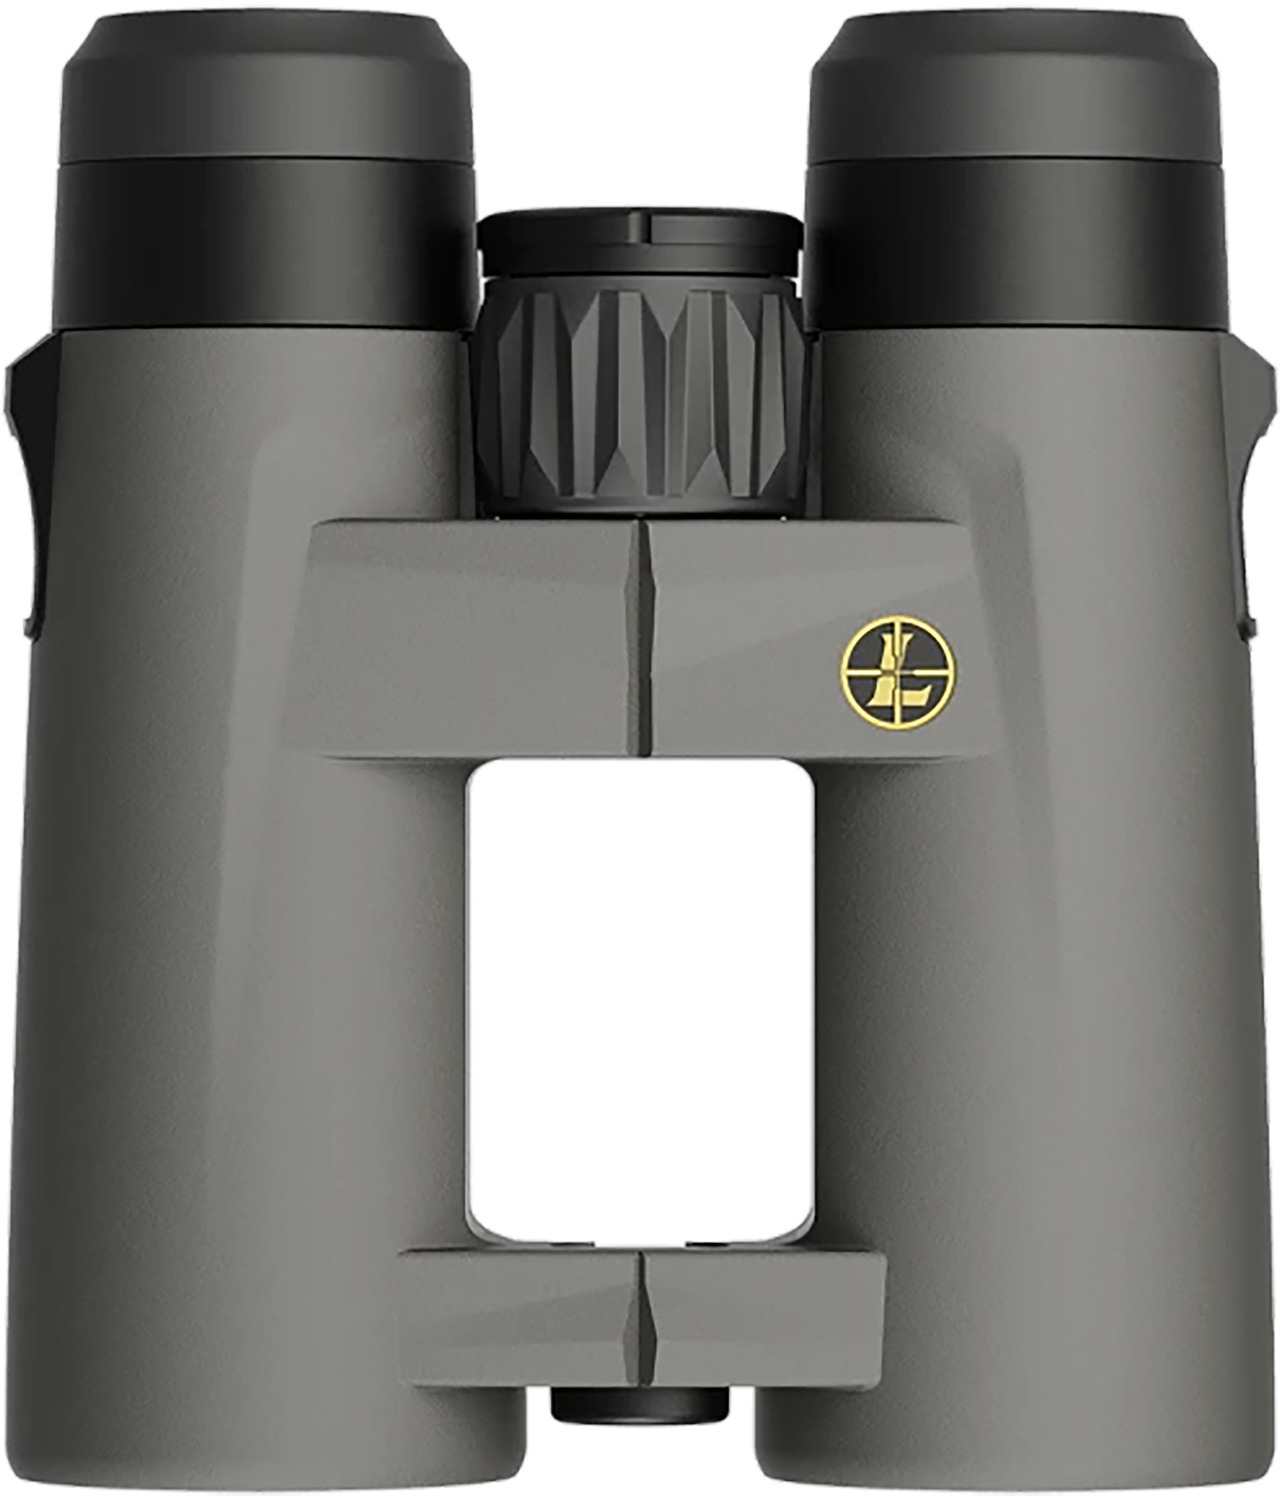 Leupold 184760 Bx-4 Pro Guide HD Gen2 8X42mm Roof Prism Black Armor Coated Magnesium